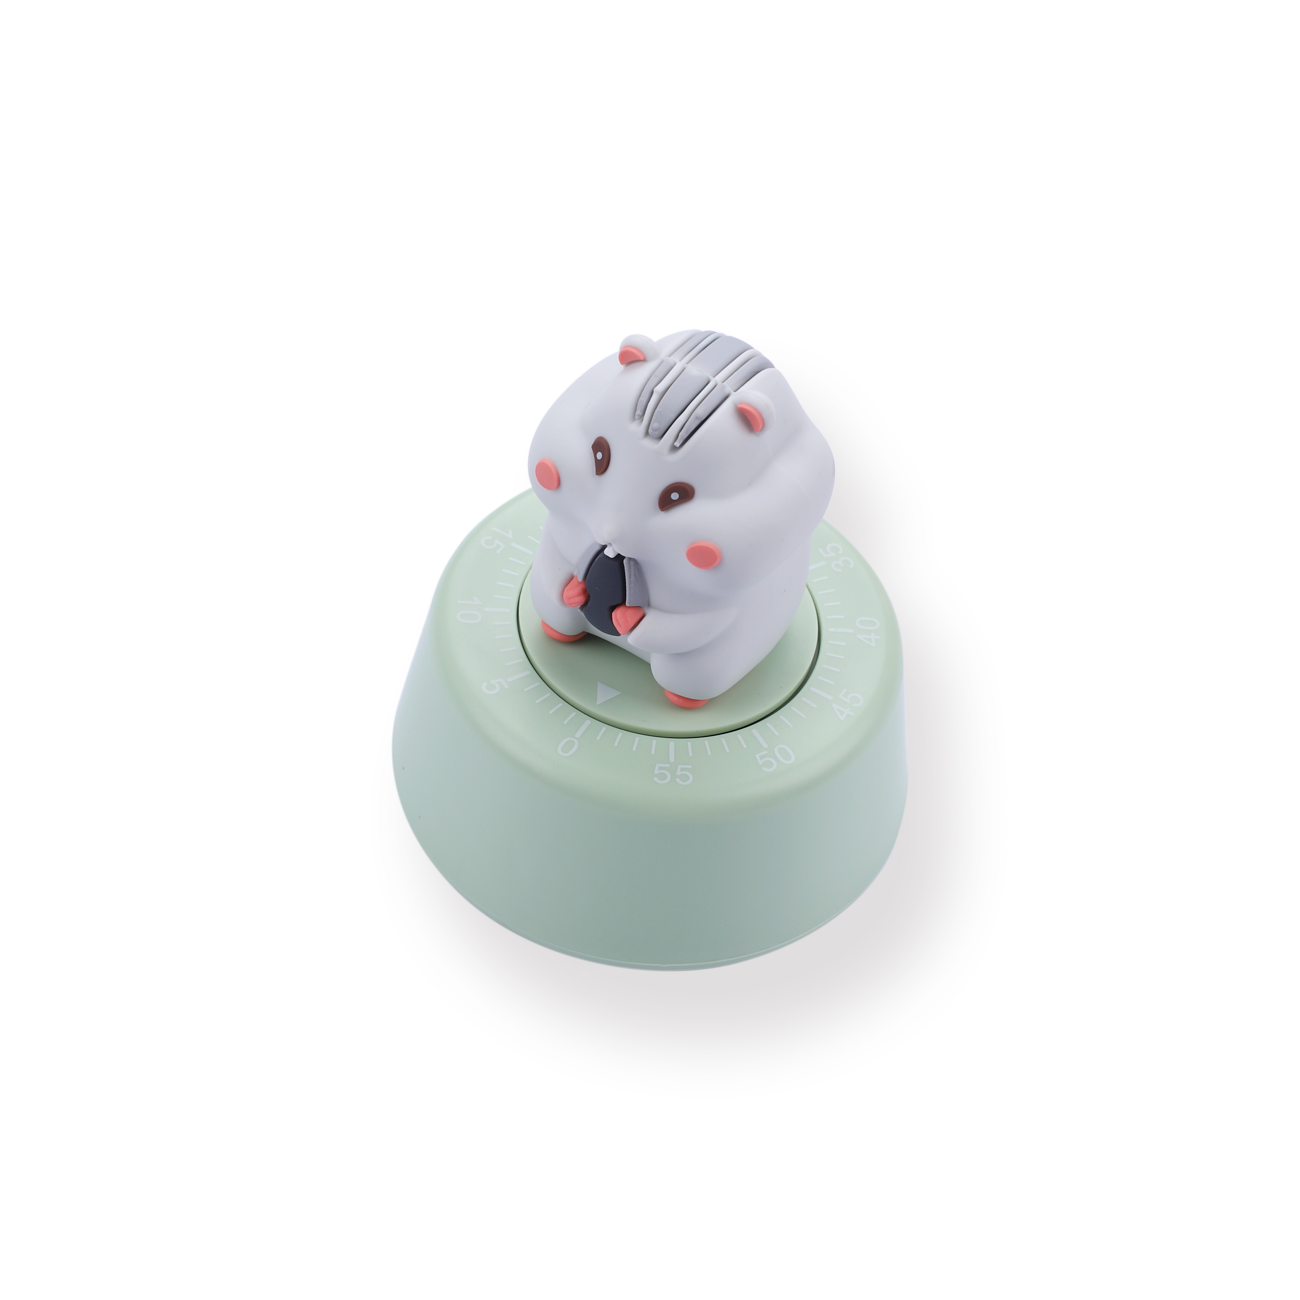 The Mechanical Cartoon Timer Manager - Hamster - Stationery Pal